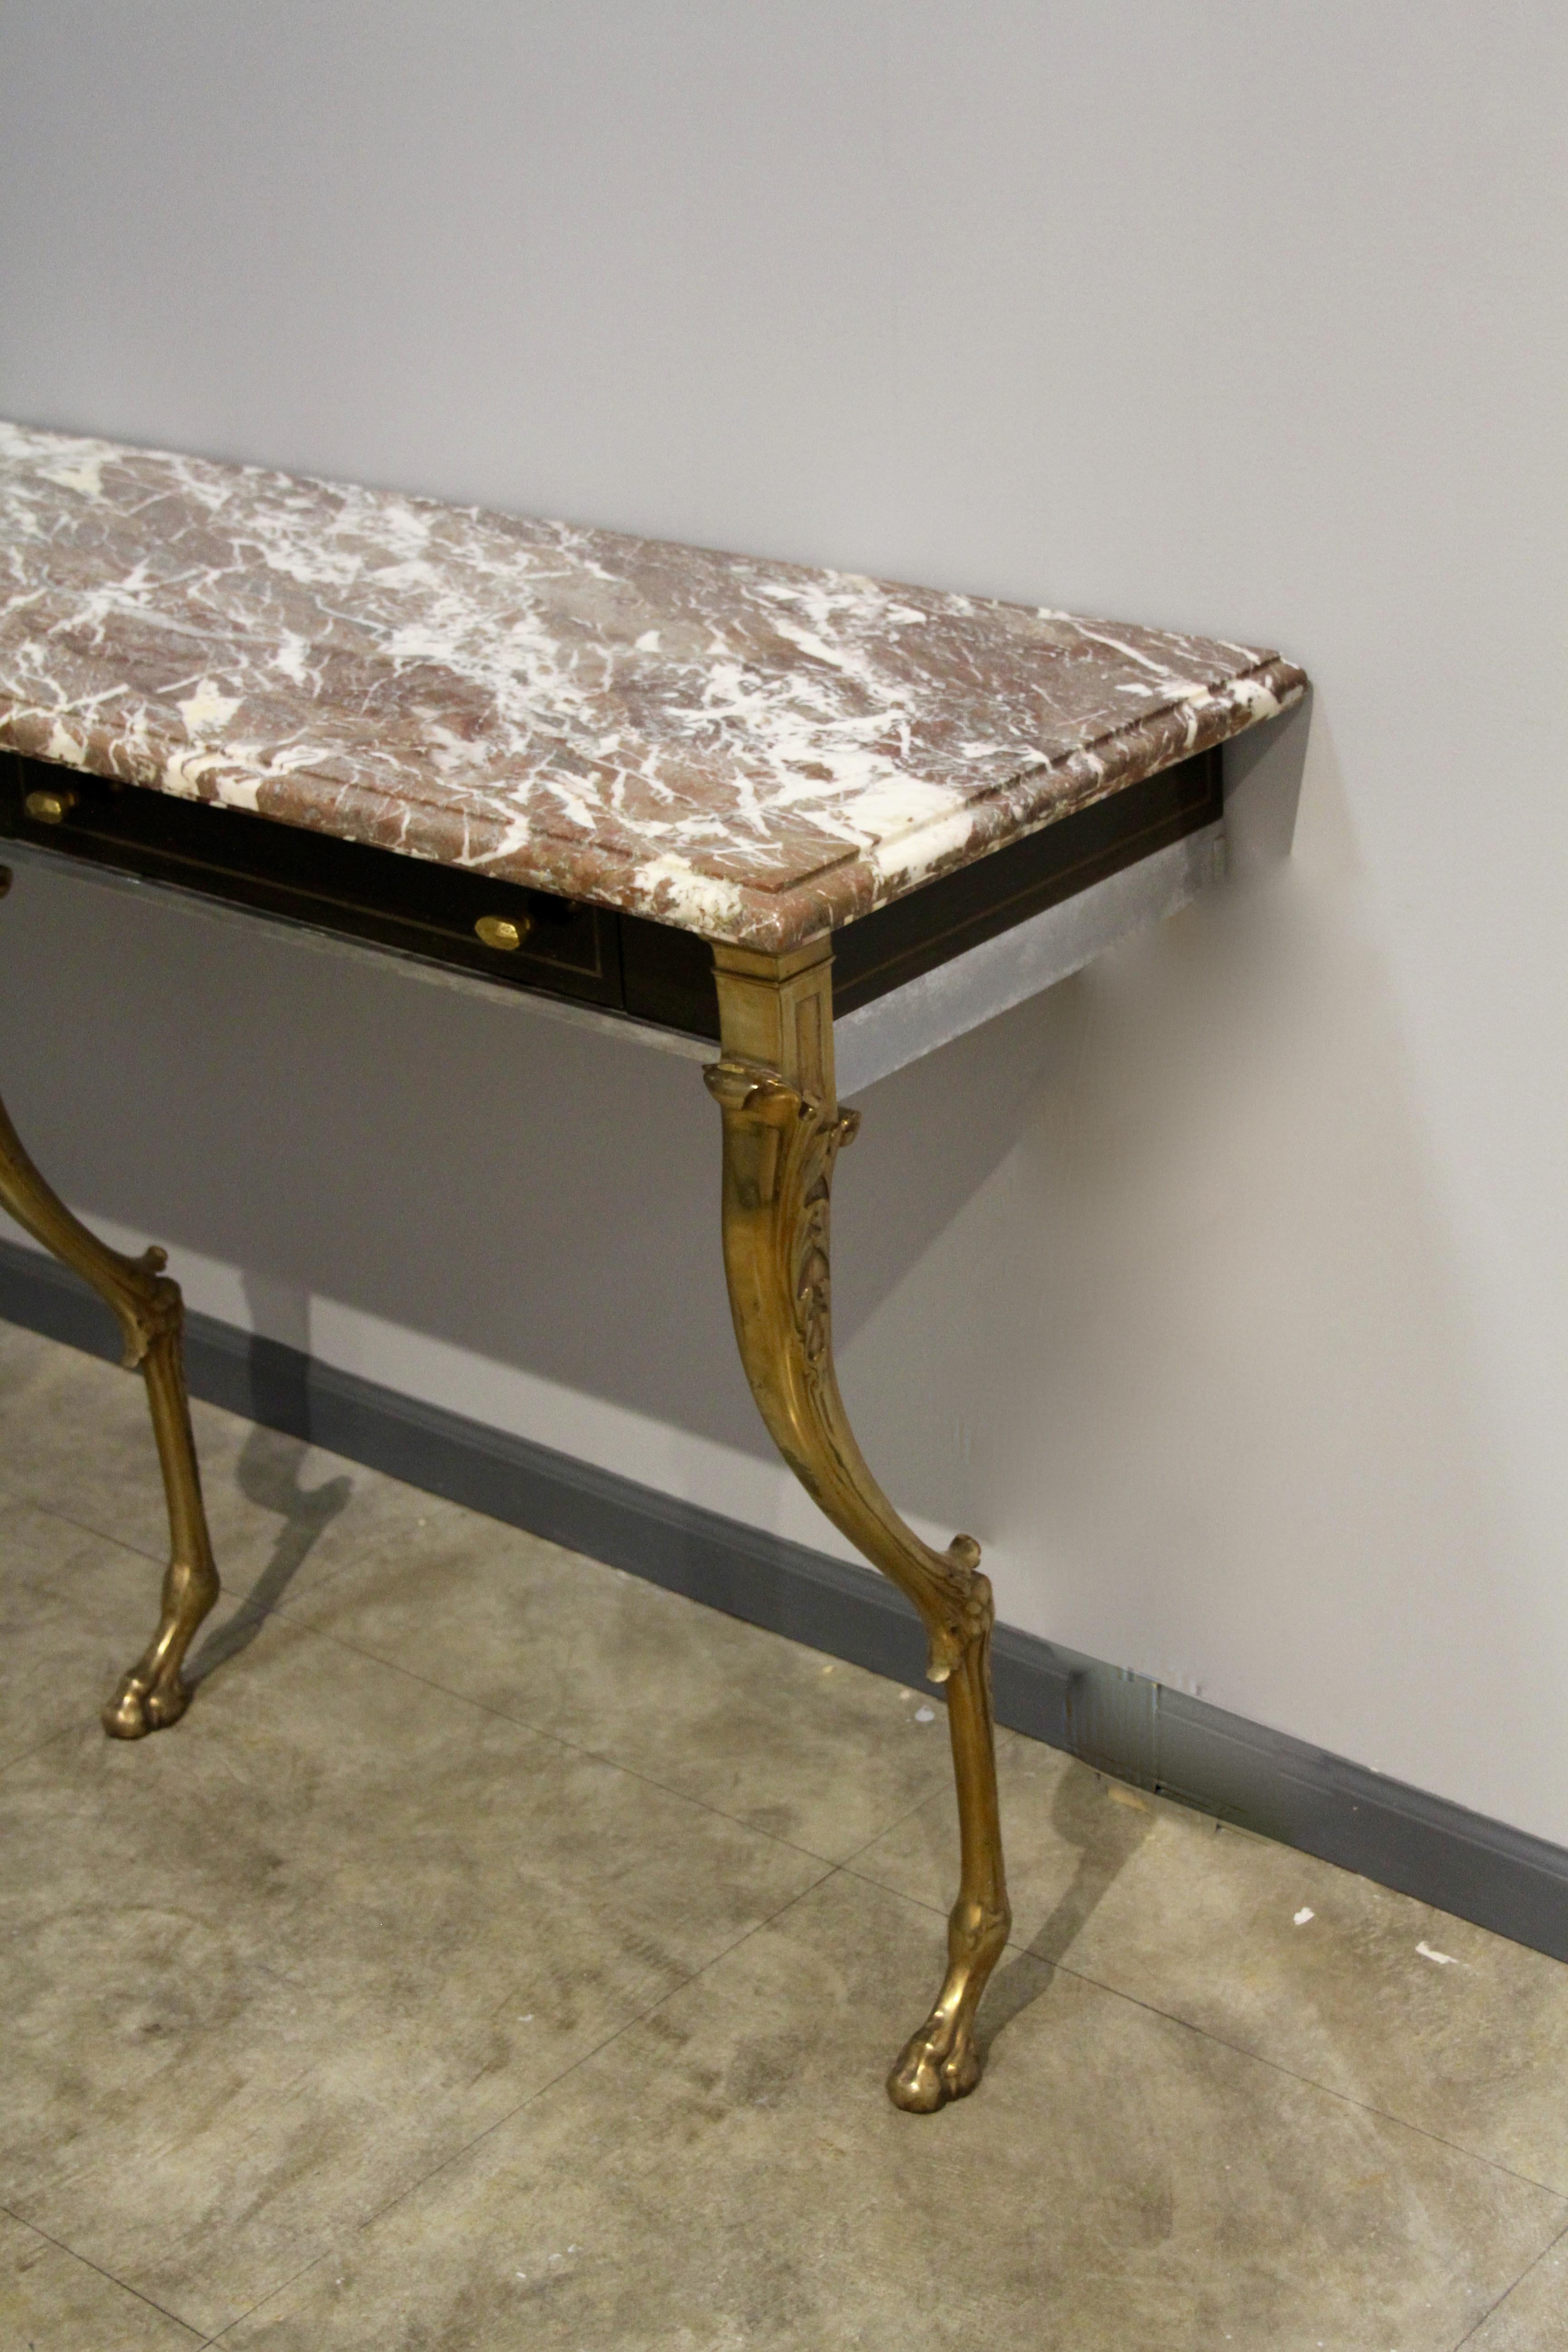 Unique 1970s Hollywood Regency Sideboard with Brass Hoof Legs and Marble Top For Sale 1